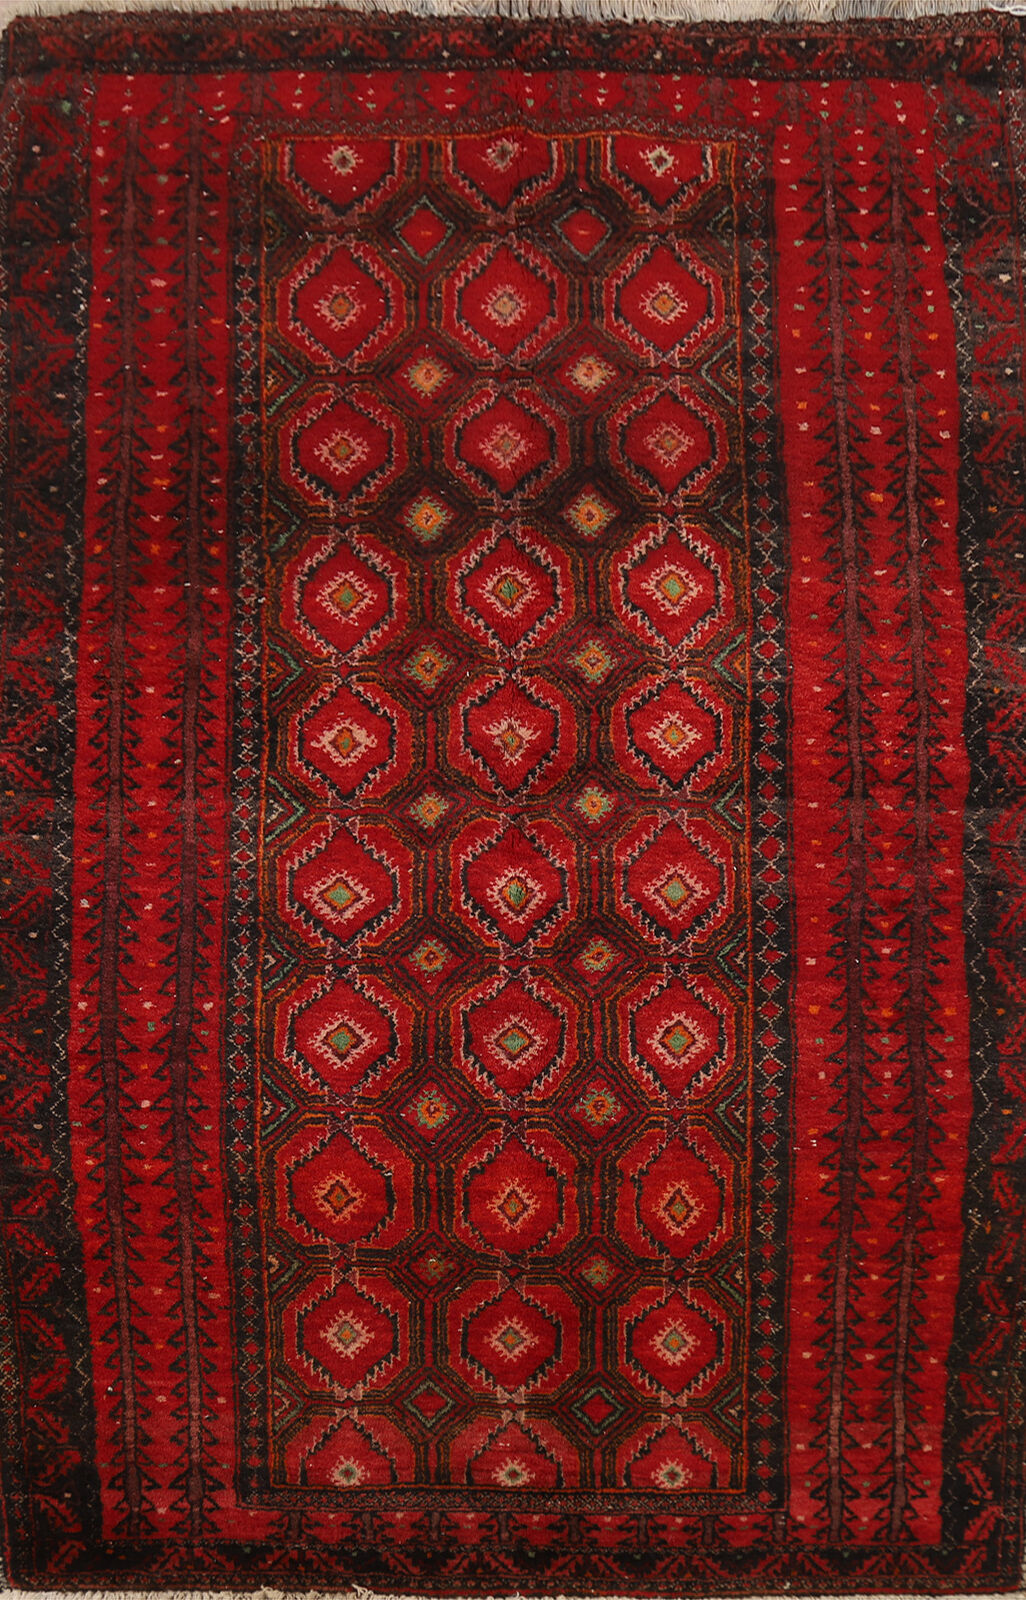 Vintage Tribal Traditional Red Geometric Balouch Hand-made Rug Area Carpet 4x6